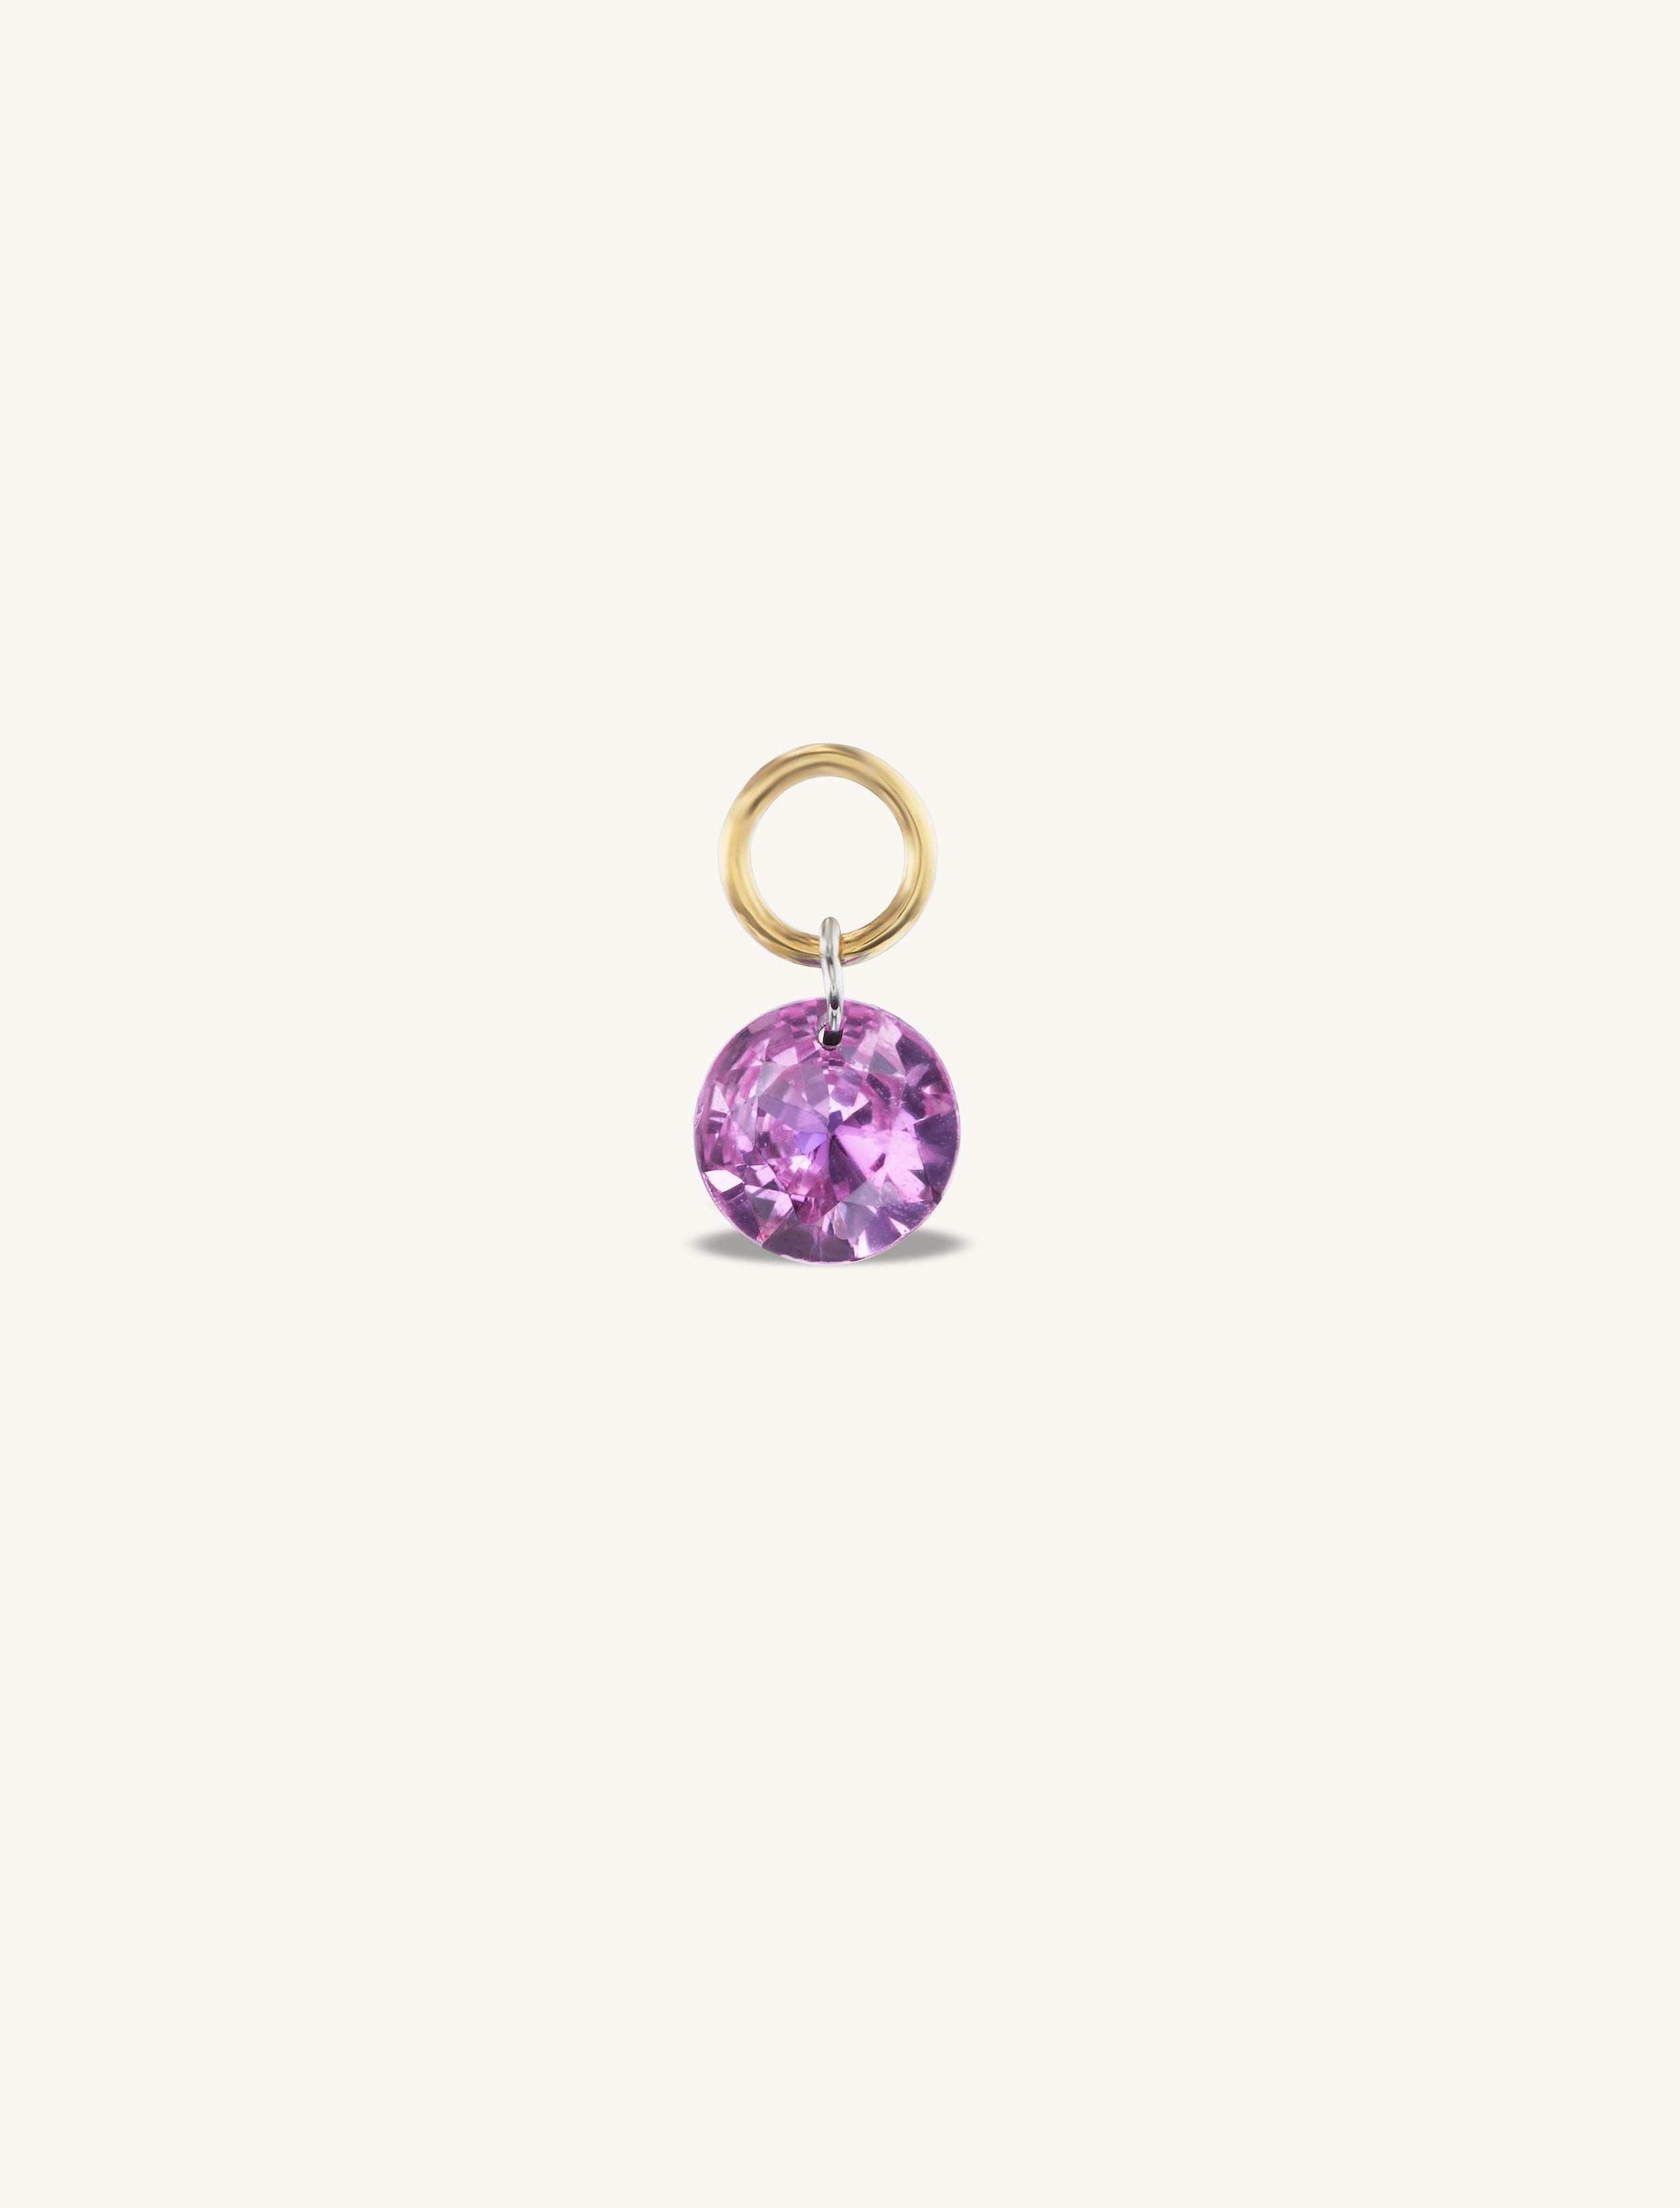 Small Round Pierced Pink Sapphire Charm for Huggies